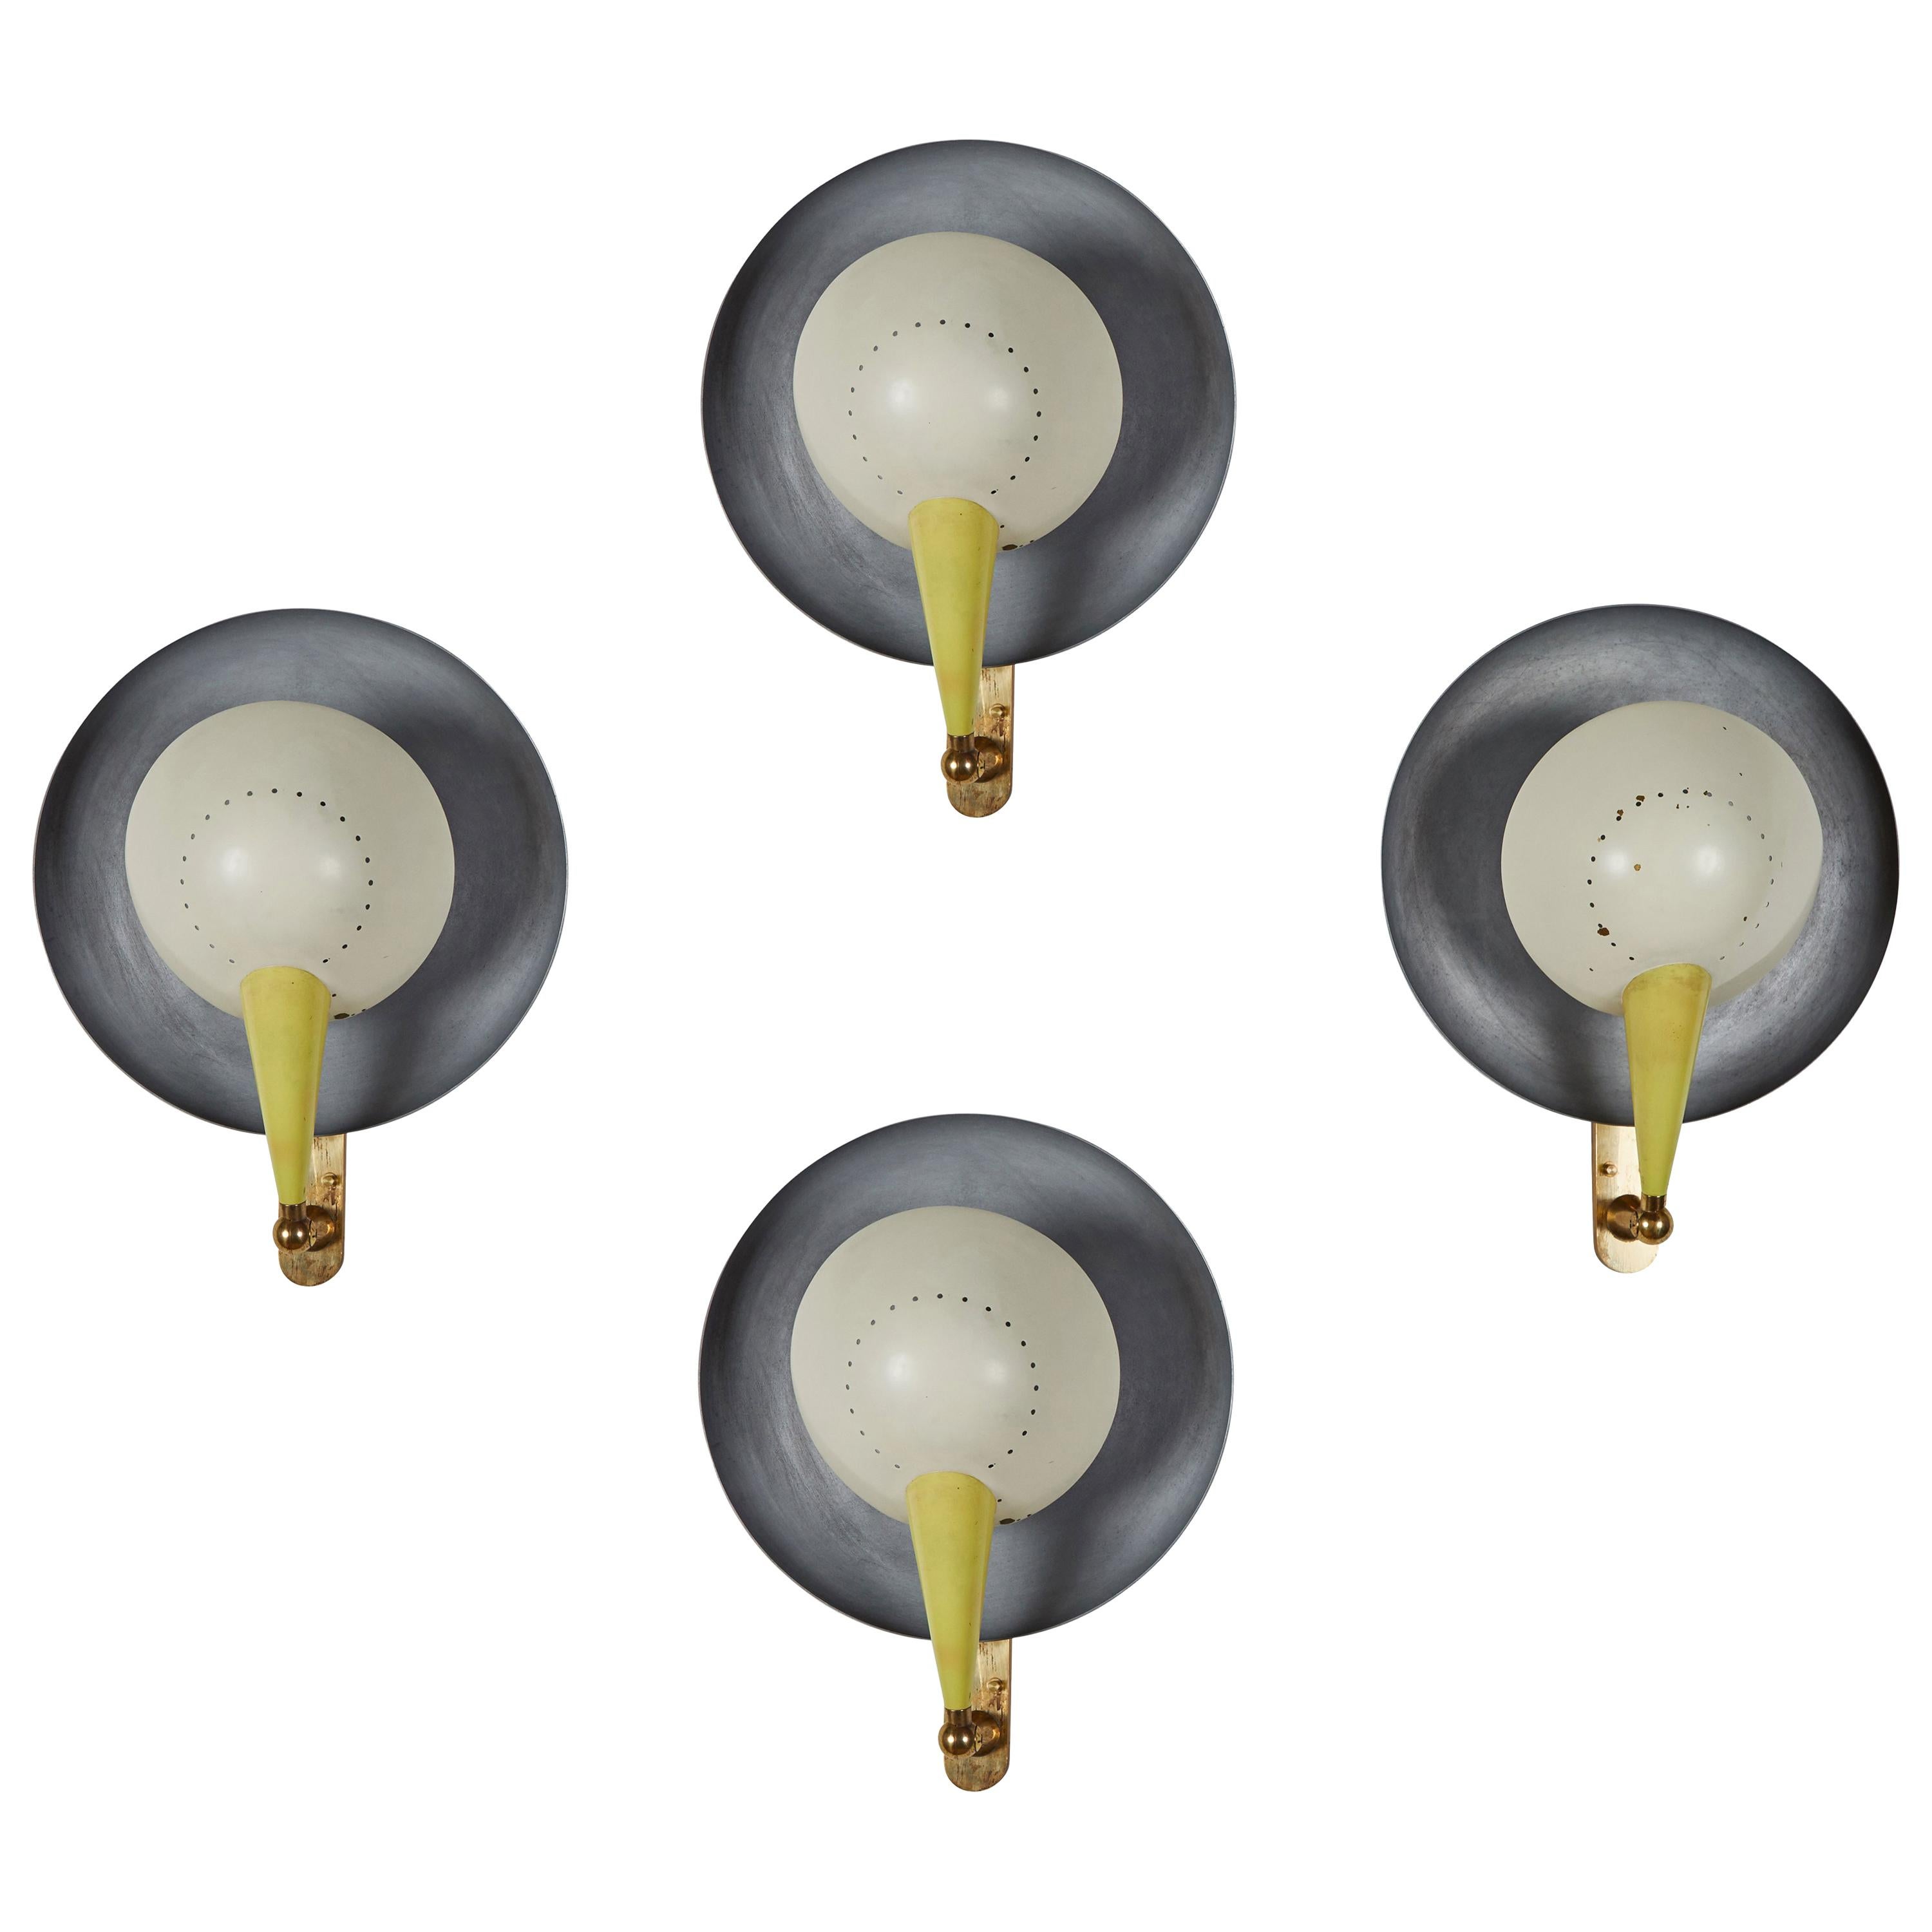 Aluminum and brass. Rewired for US junction boxes. Adjustable shades. Each light takes one E27 75w maximum bulb. Priced per pair.
Literature: Roberto Aloi, L’ Arredamento Moderno, sesta serie, Milan, 1955, fig. 236 for a similar example Italian